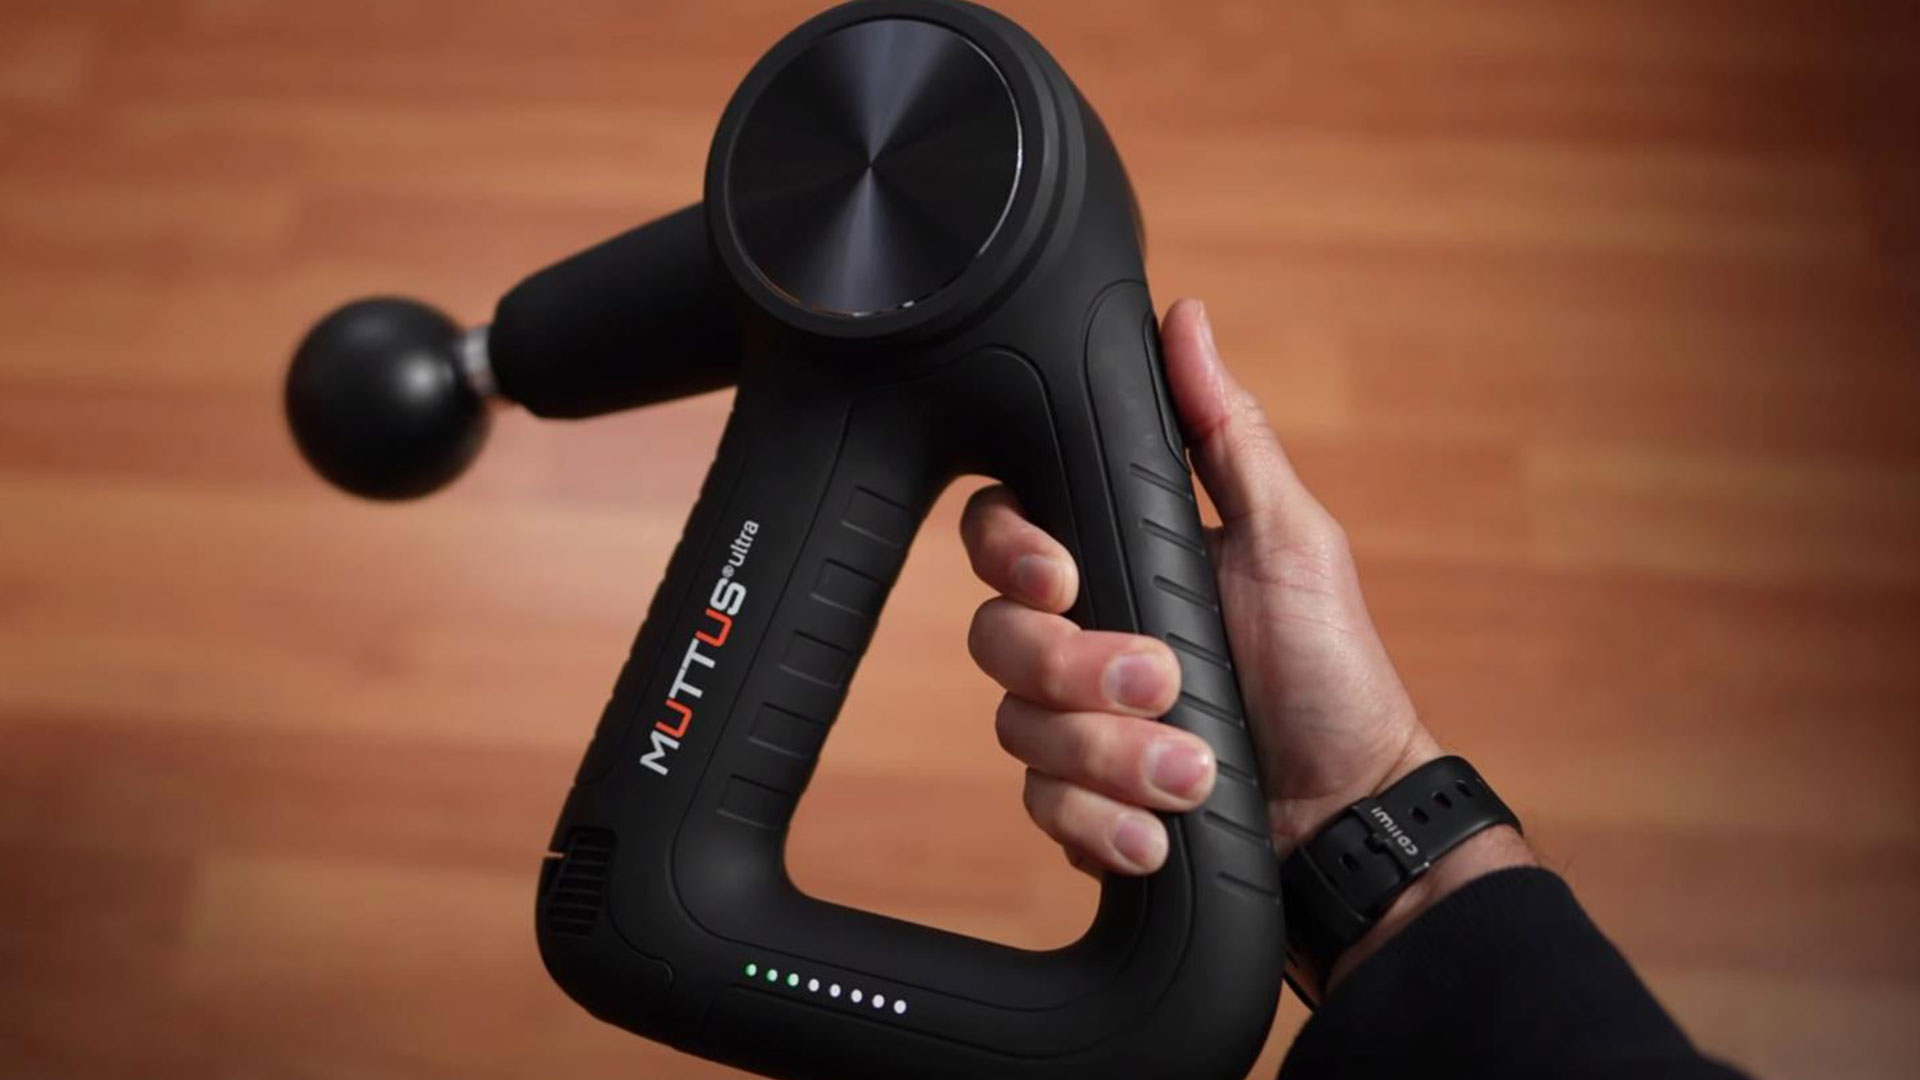 Some Must Knowing Things about the Massage Guns